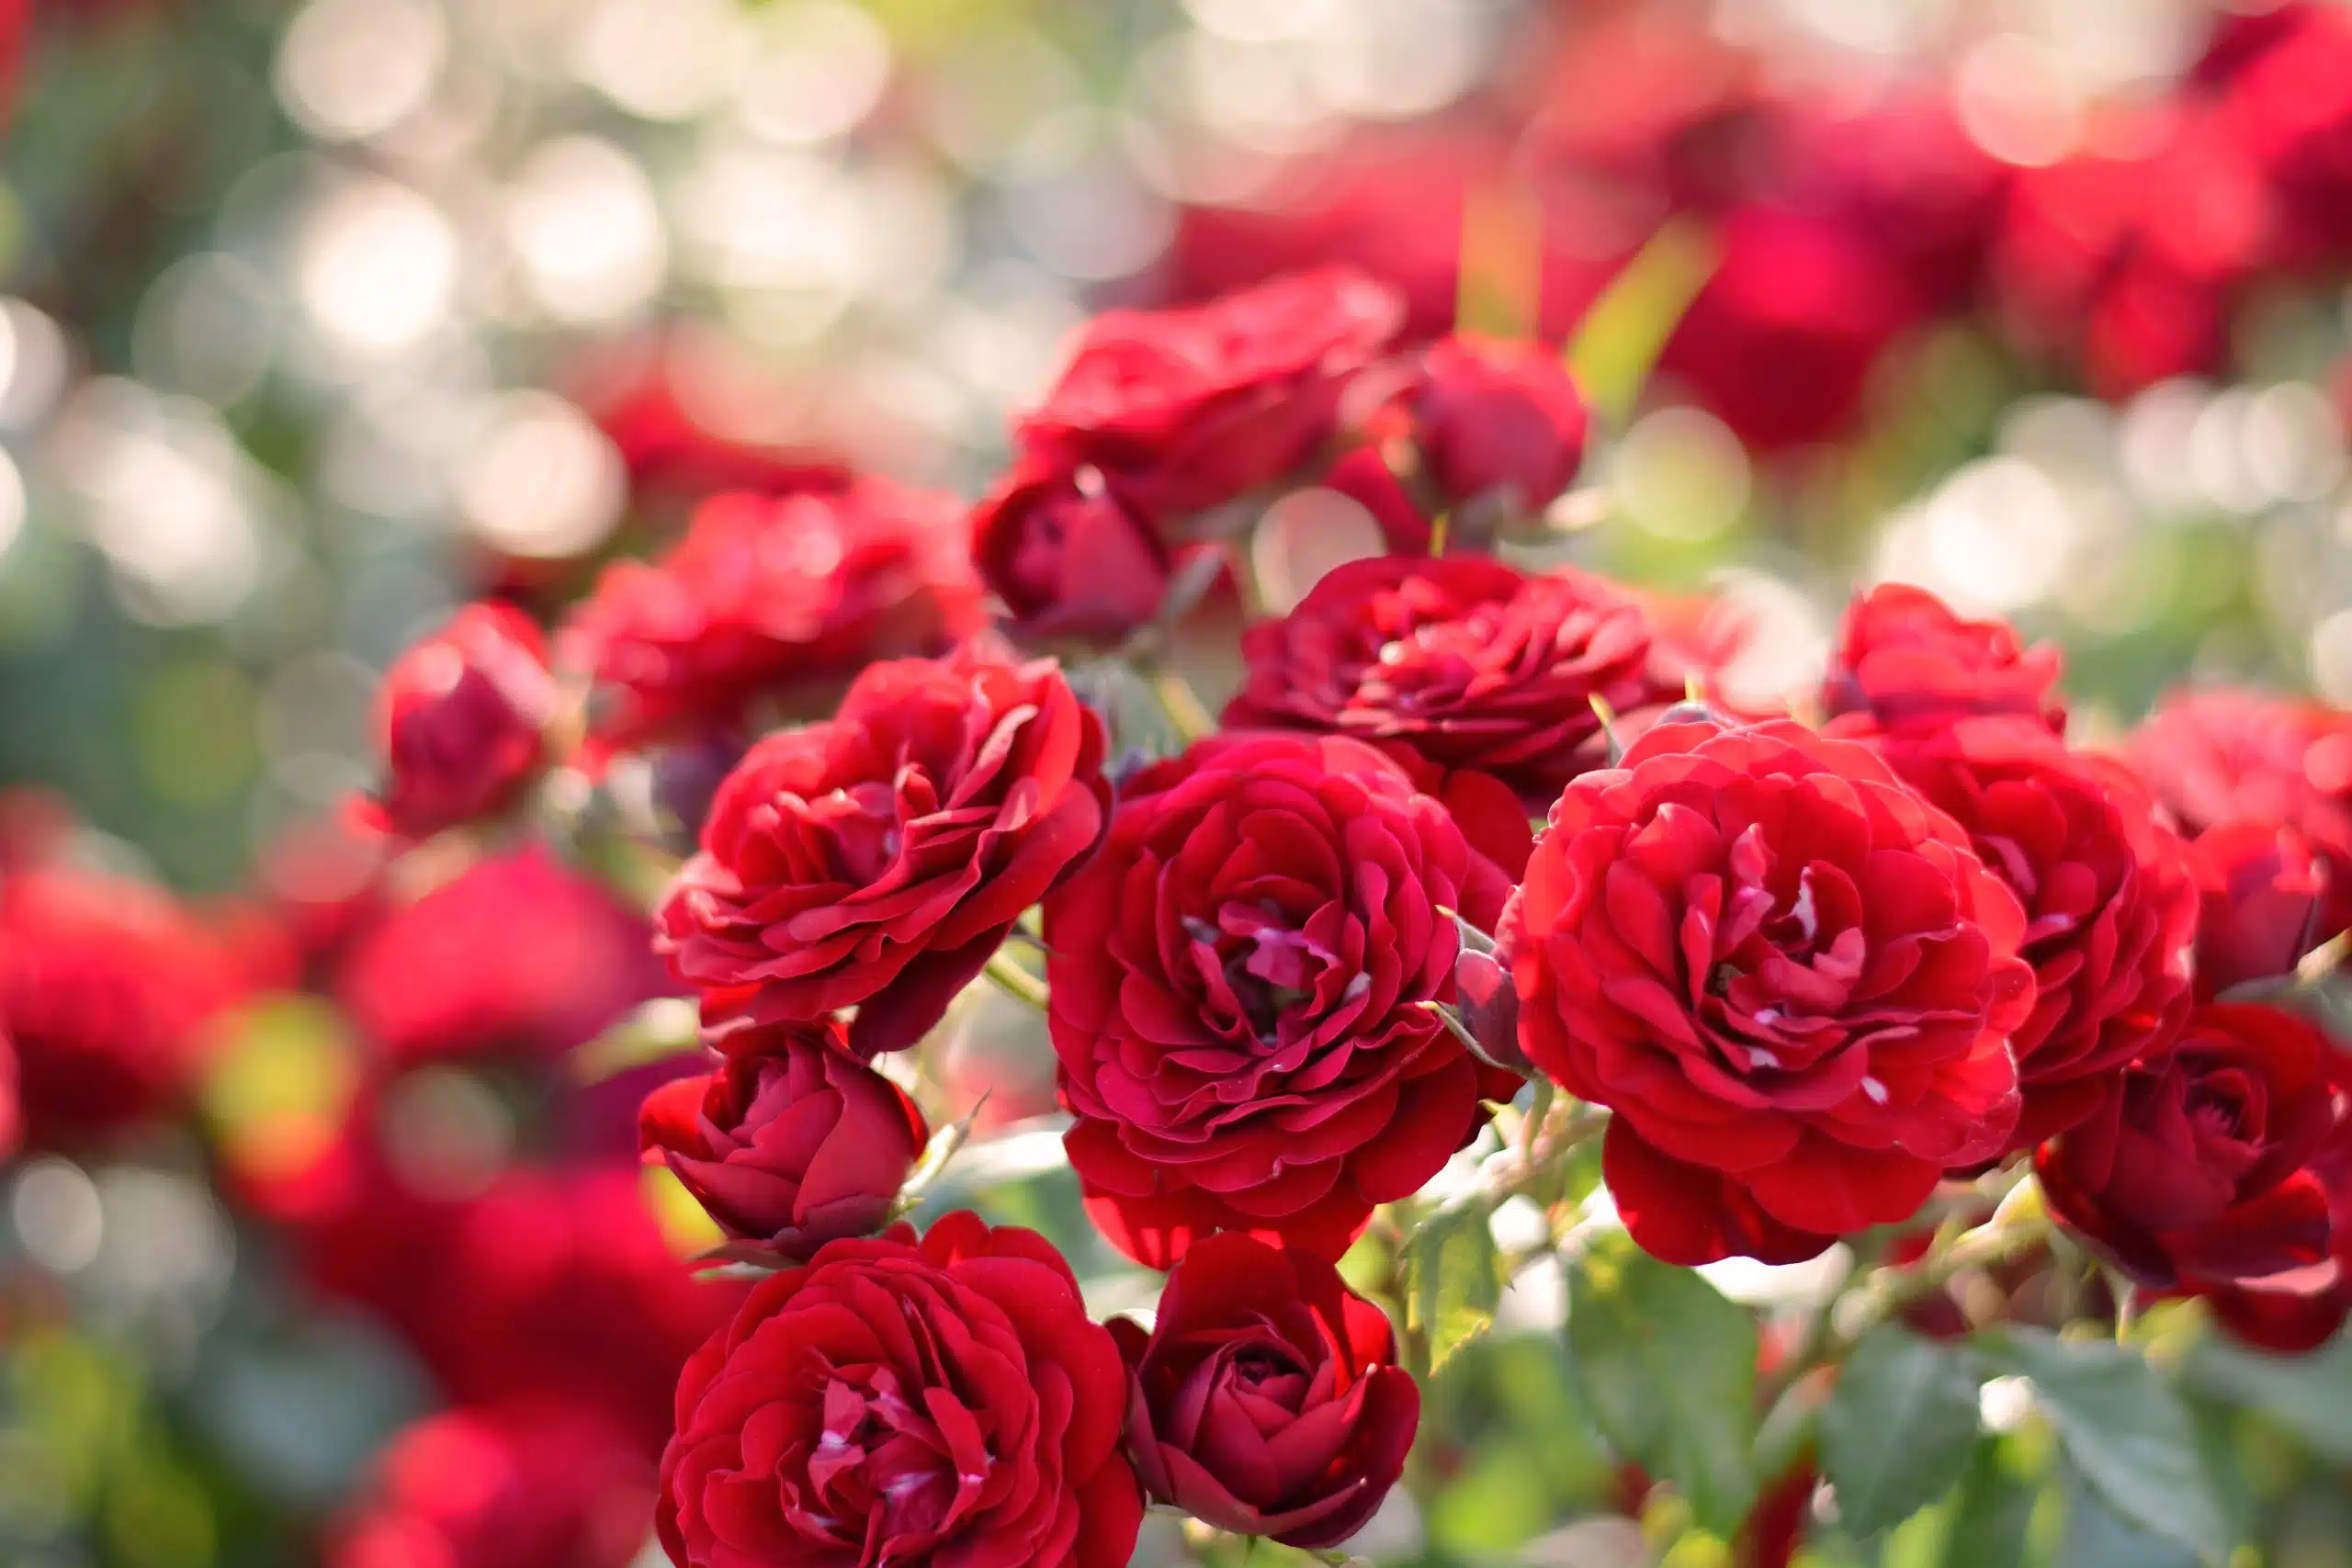 Red roses blooming in sunlight.